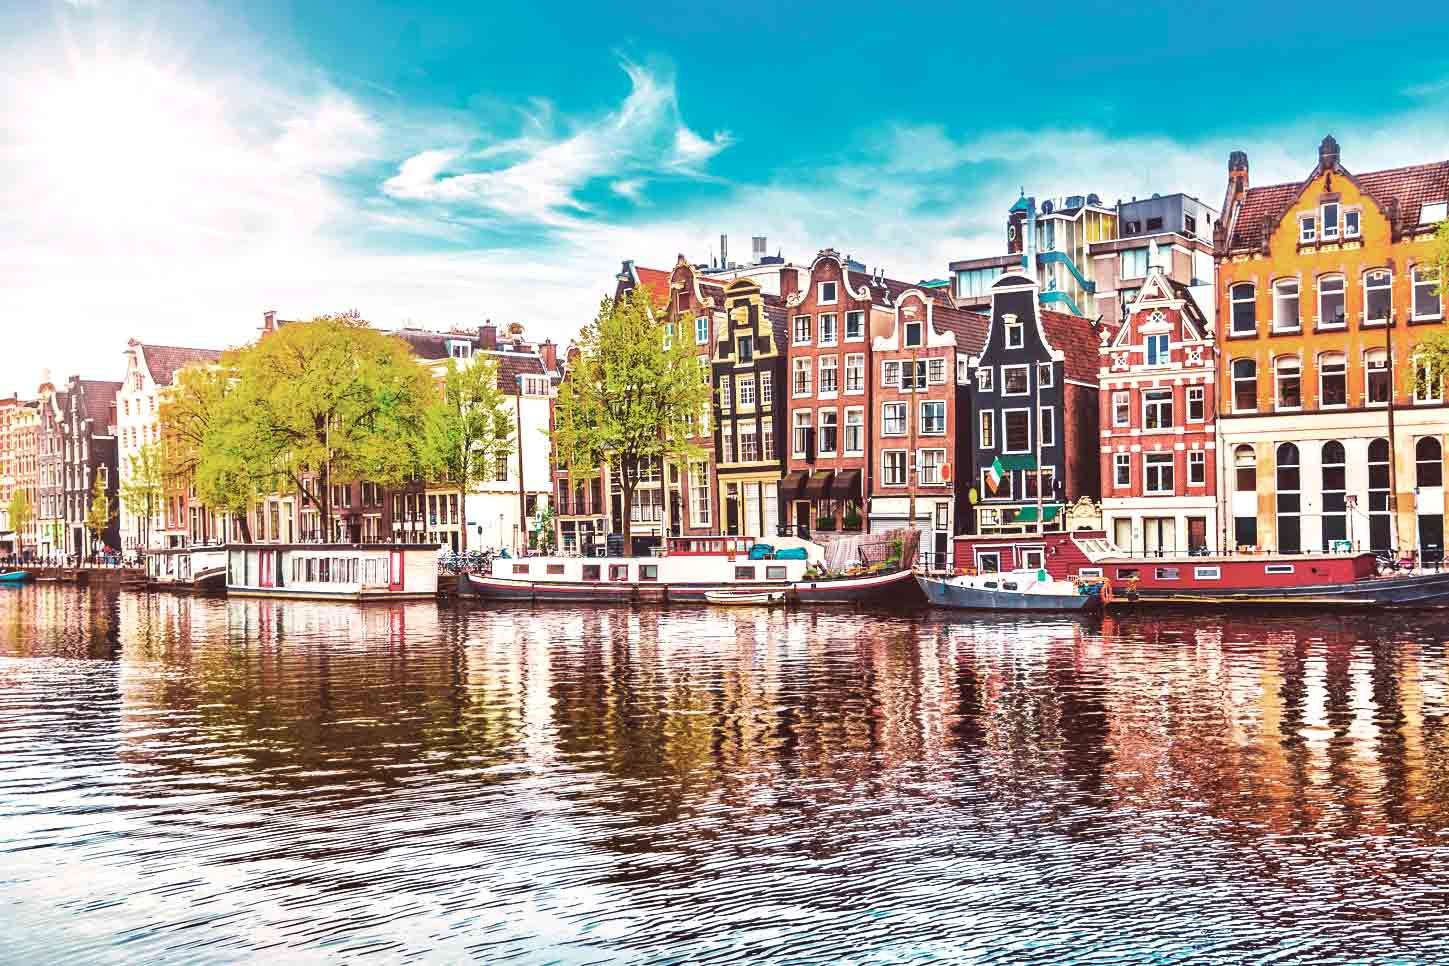 Amsterdam is one of the best European cities for families